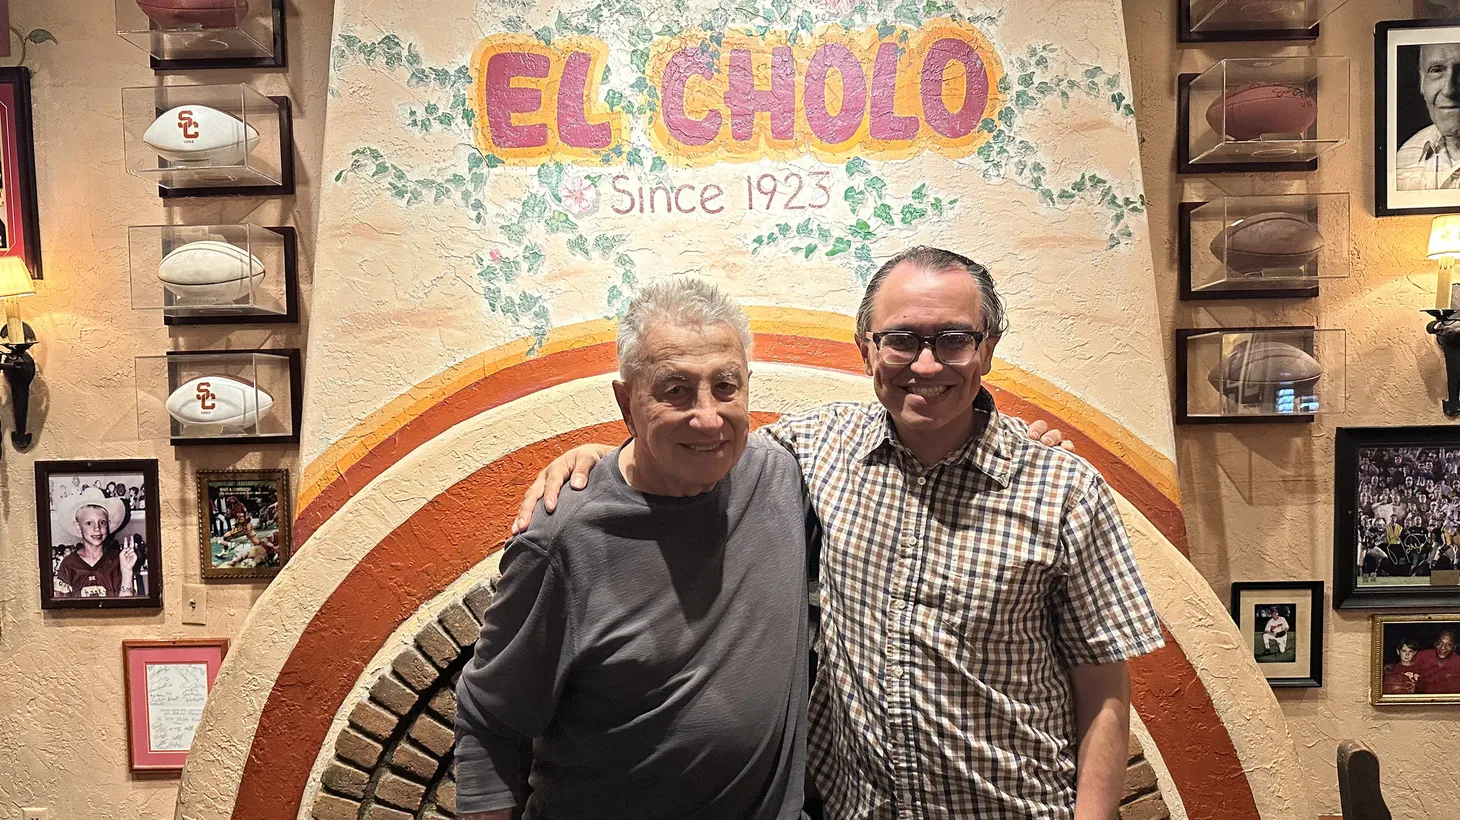 El Cholo owner Ron Salisbury (left) and journalist Gustavo Arellano pose in front of the fireplace at the restaurant's flagship location on Western Avenue in LA's Koreatown.